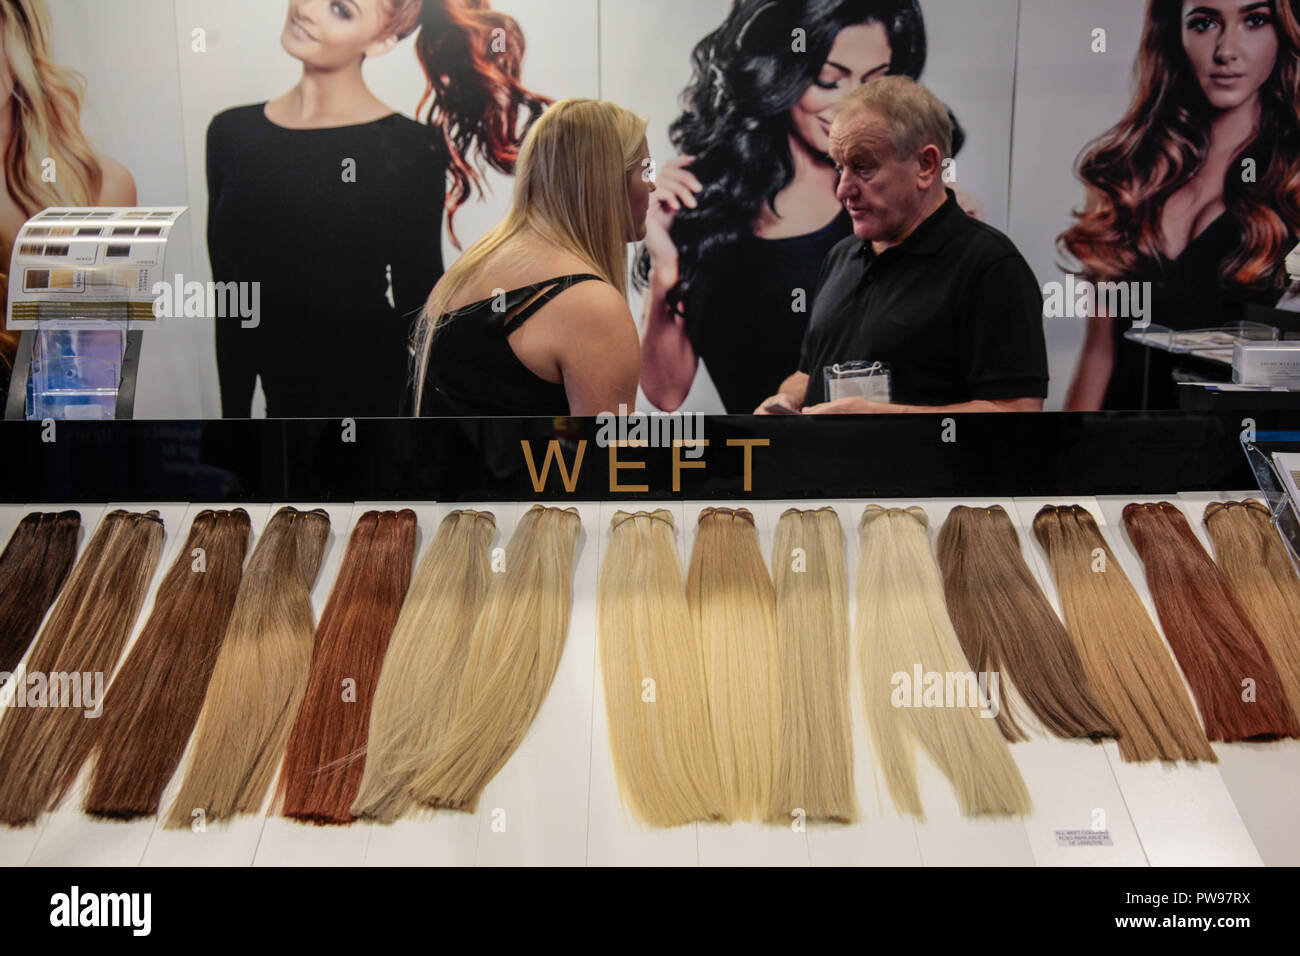 London UK 14 October 2018 Salon International presenting Australian Fame  Team ,using salt and minerals to colour and highlight the hair at the UK's  biggest hairdressing event with over 400 brands including